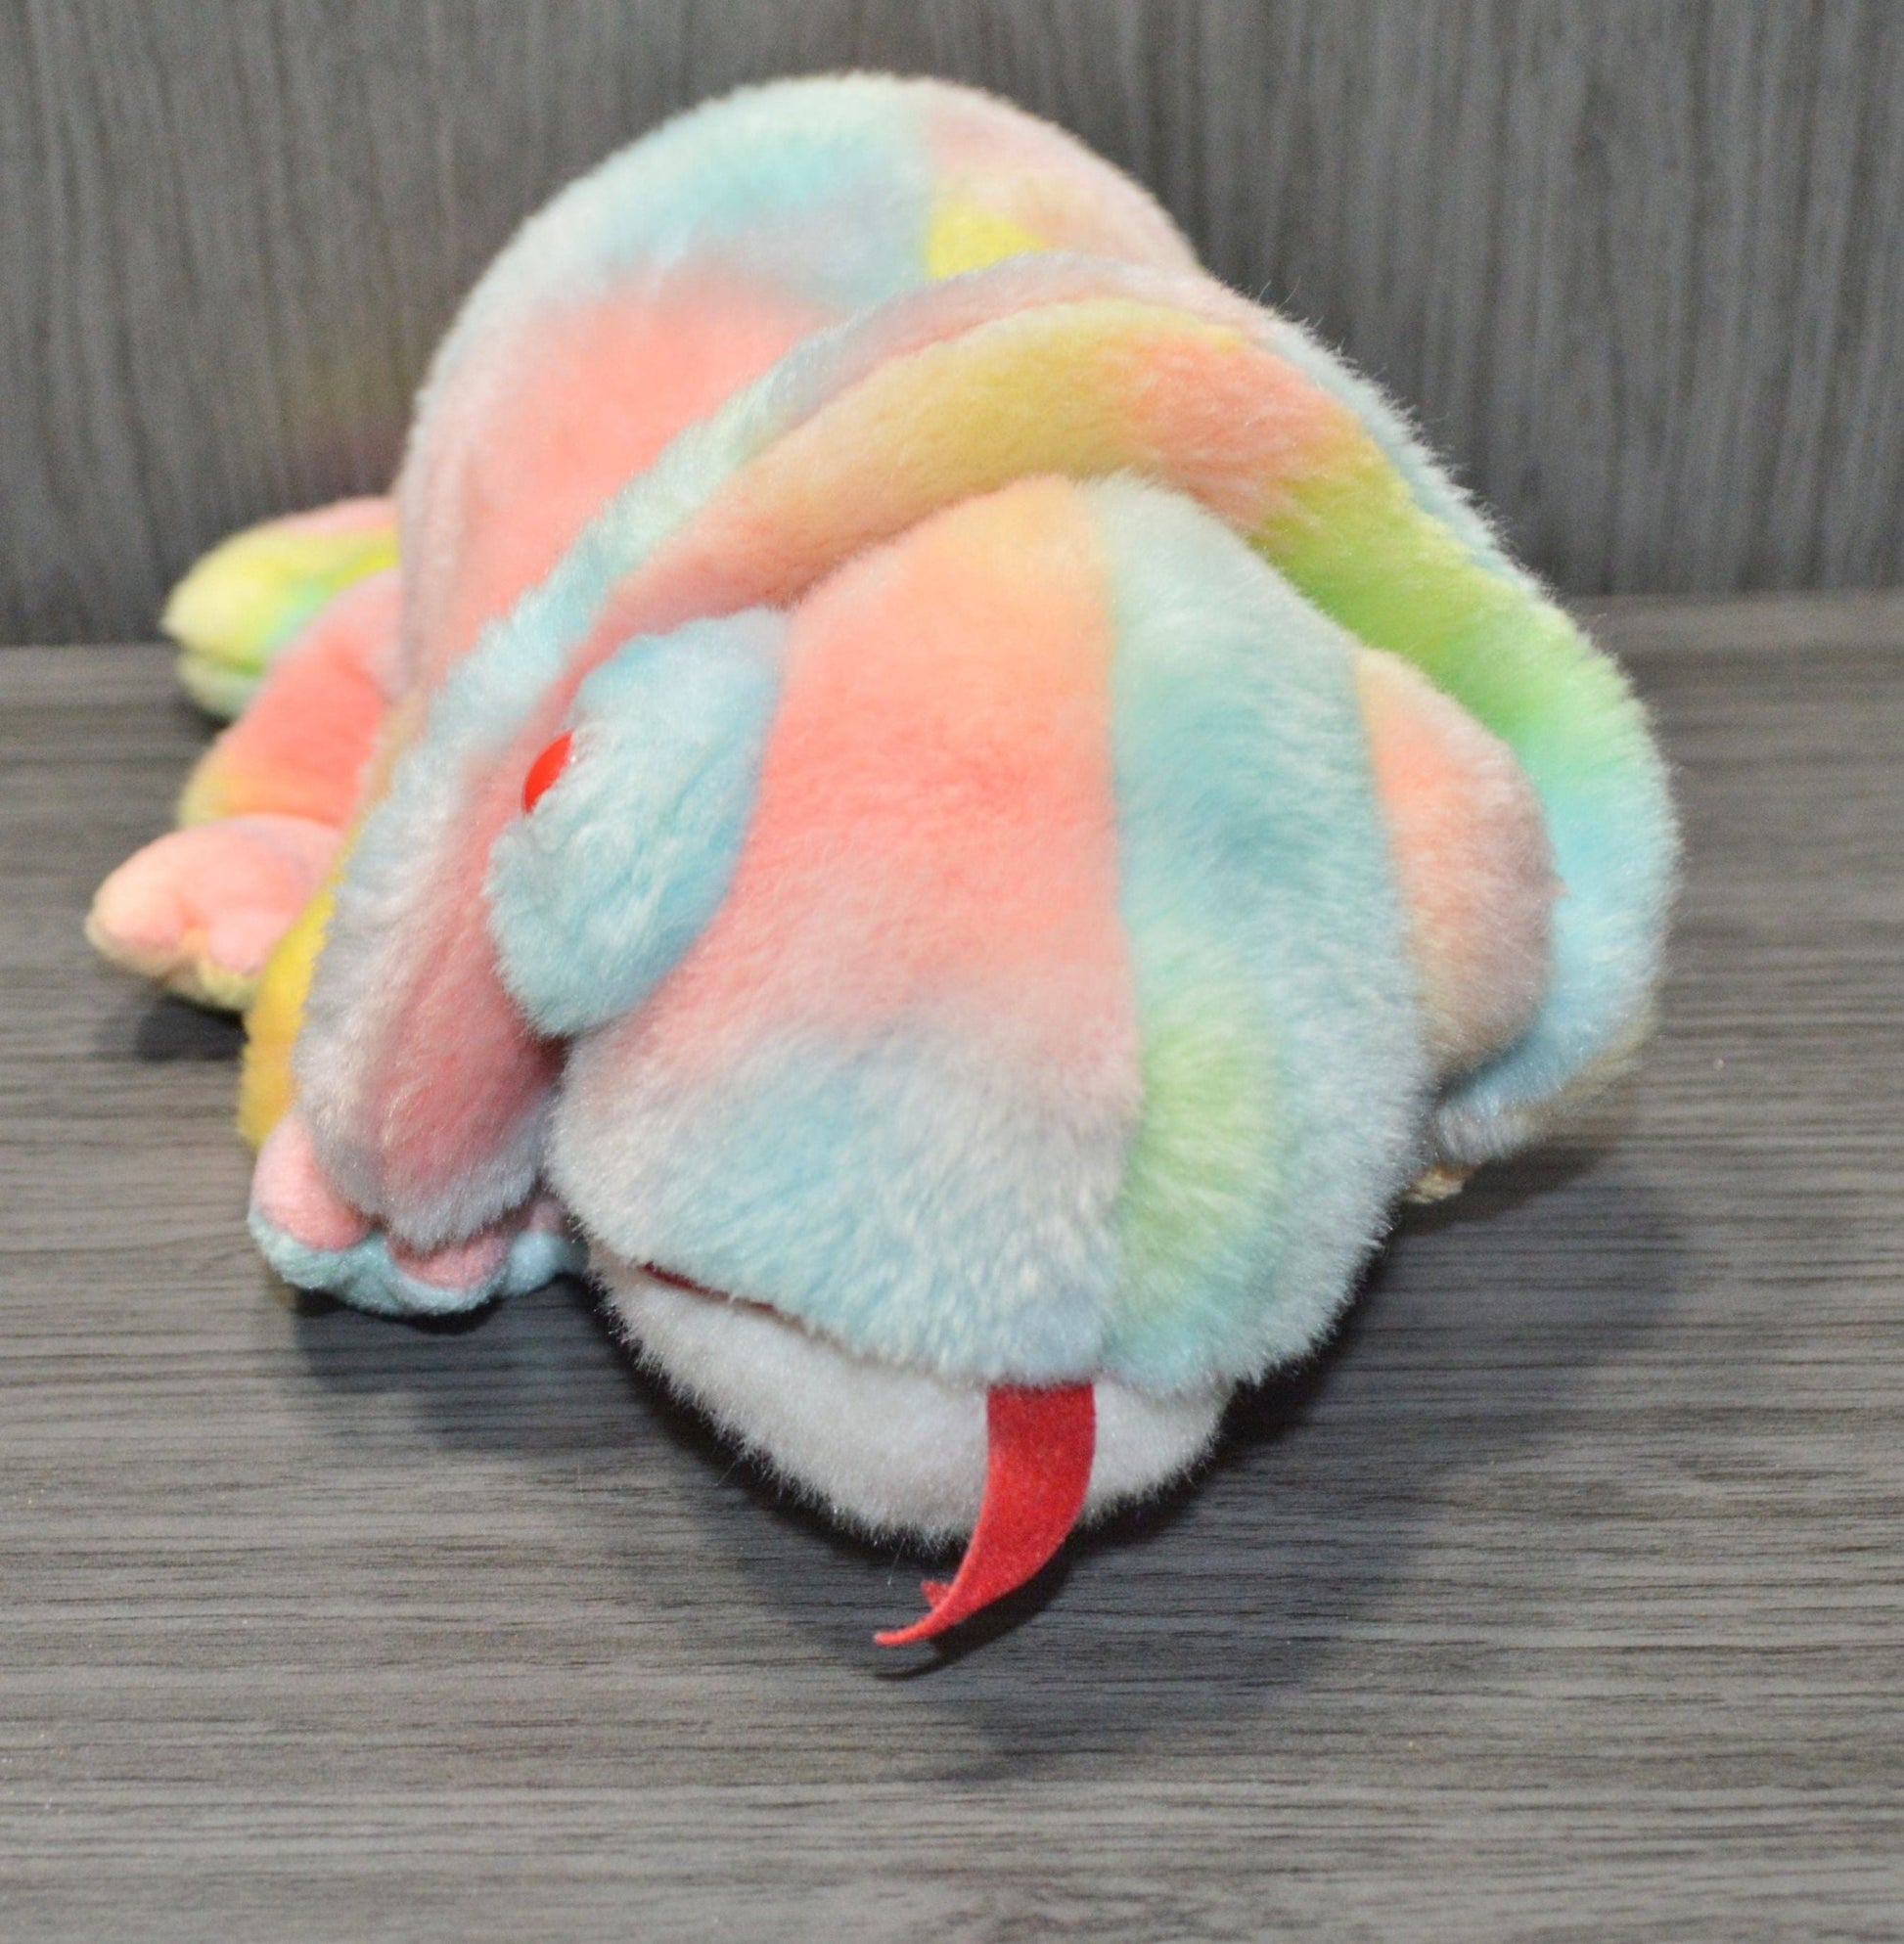 SOFT TOY TY THE BEANIE BUDDIES IGUANA(PREVIOUSLY OWNED)GOOD CONDITION - TMD167207